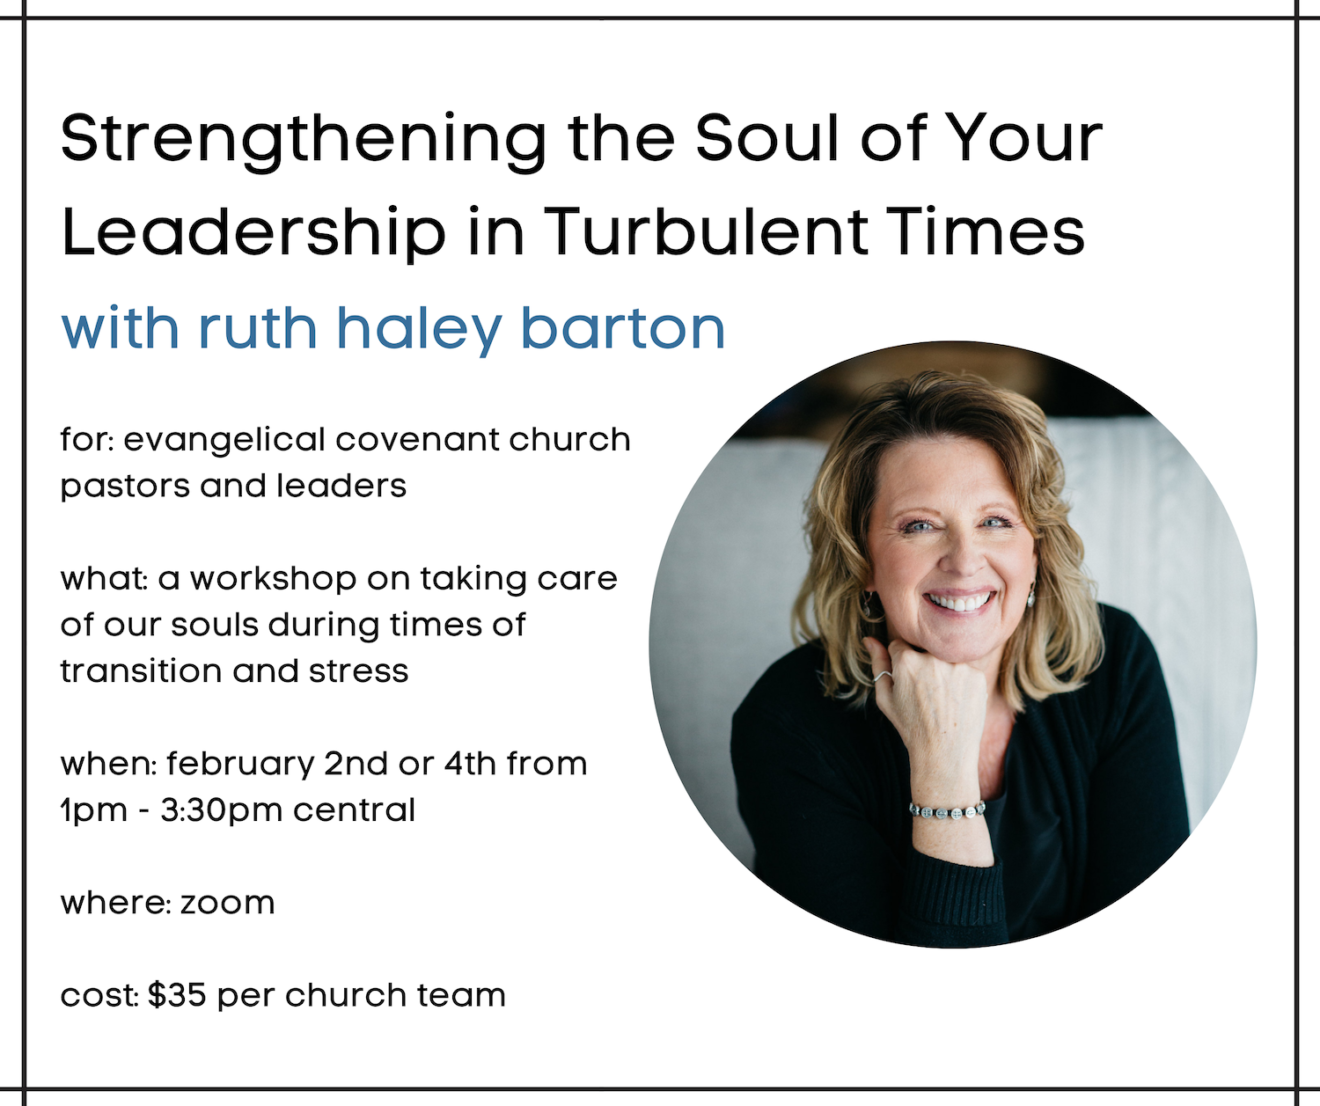 Strengthening the Soul of Your Leadership in Turbulent Times